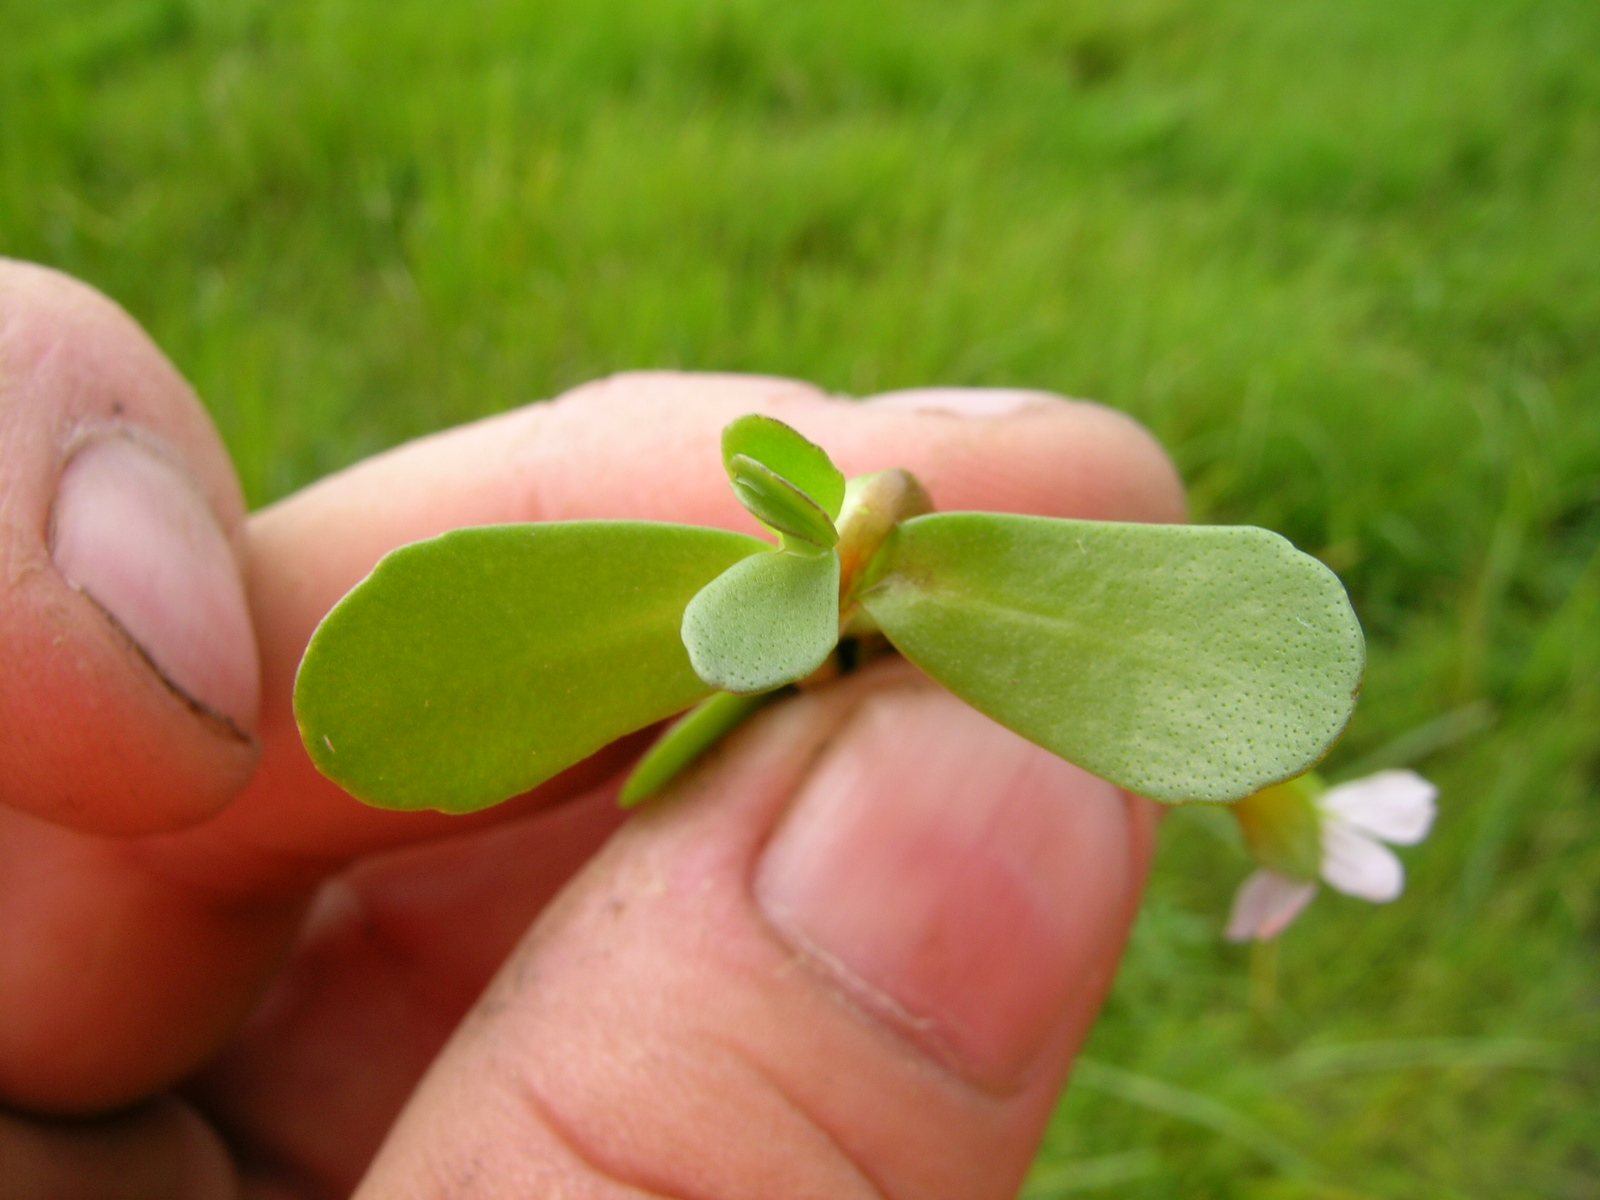 a small green plant in someones hand on a grass field